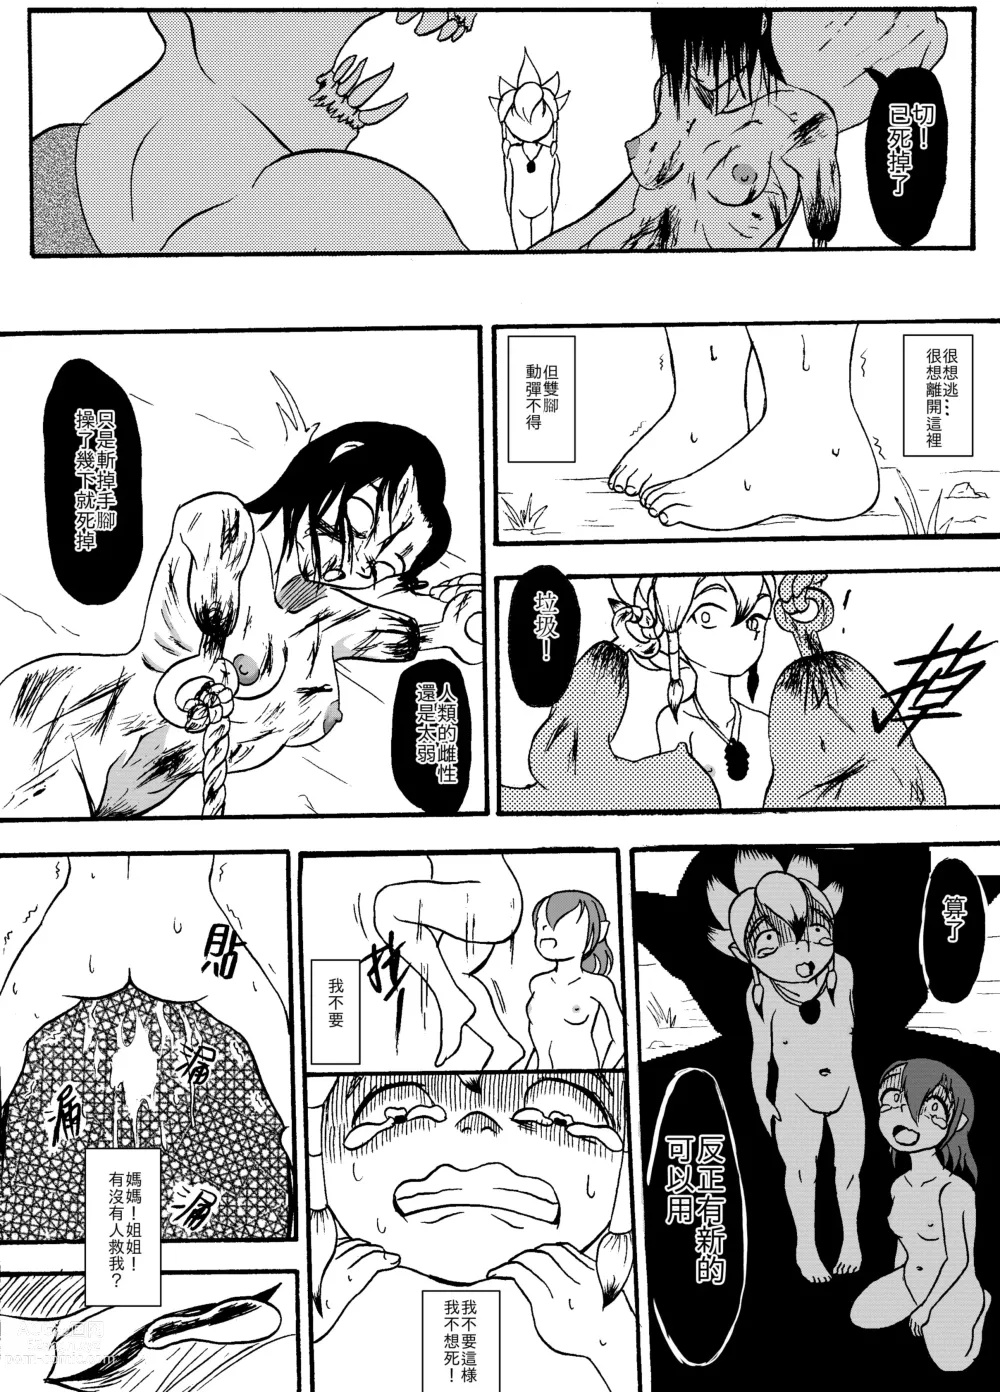 Page 30 of manga 哥布林傳奇7 Goblin Legend Chapter